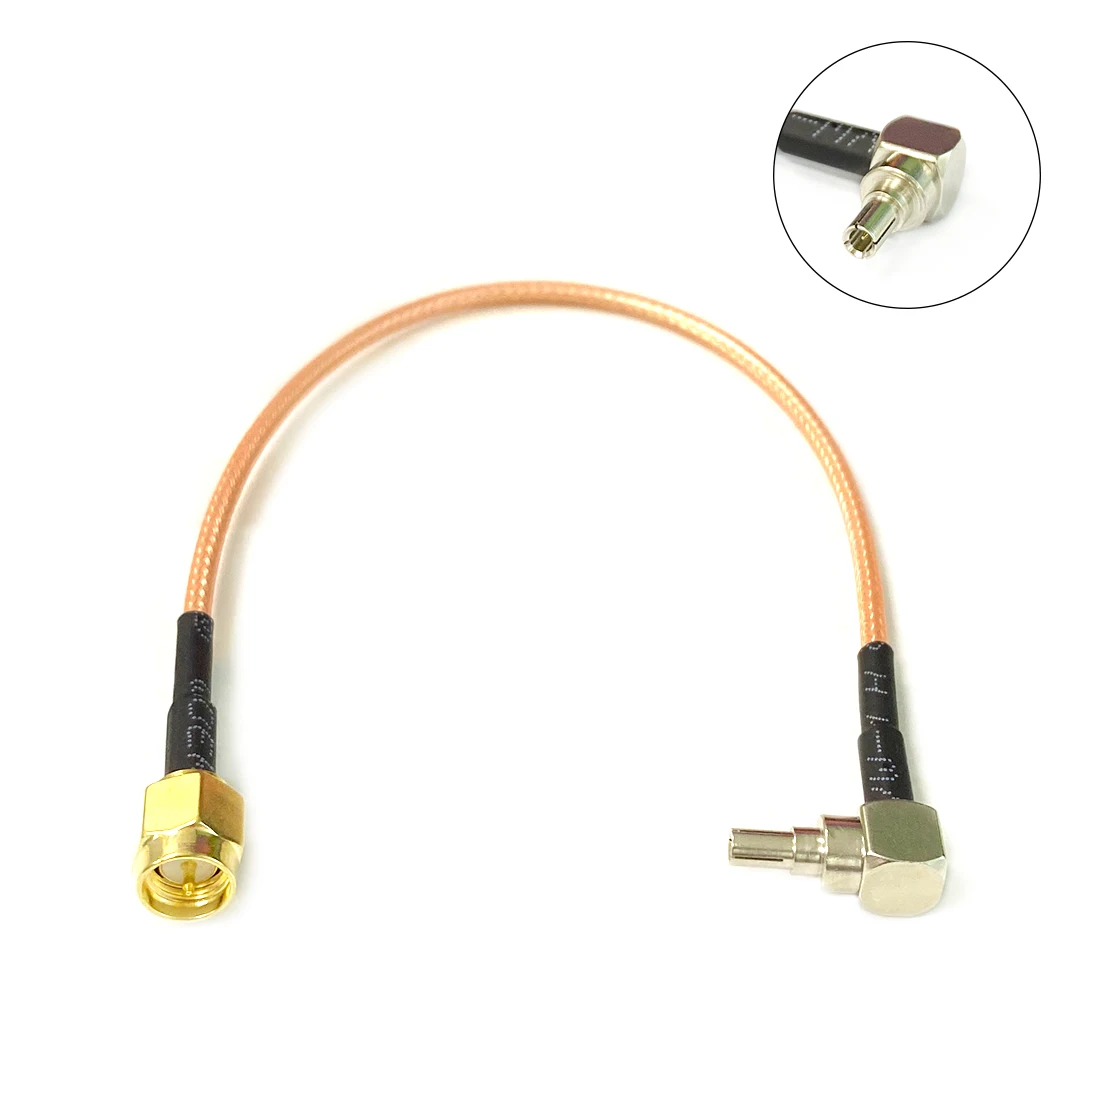 

New SMA Plug Switch CRC9 Male Right Angle Convertor RG316 Cable 15CM/30CM/50CM/100CM for 3G HUAWEI Modem Wholesale